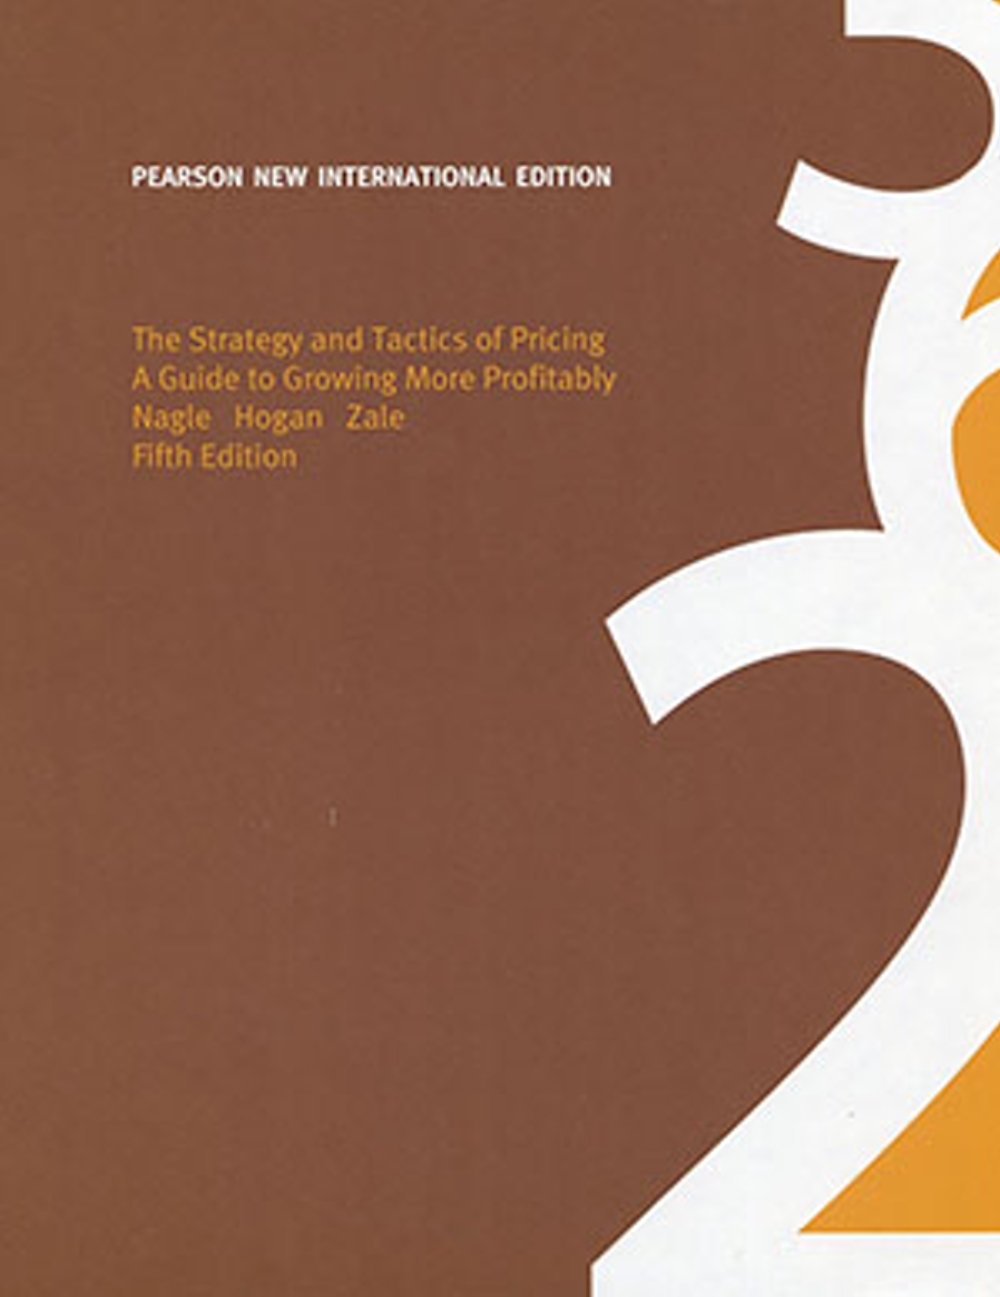 The Strategy and Tactics of Pricing (PNIE)(5版)